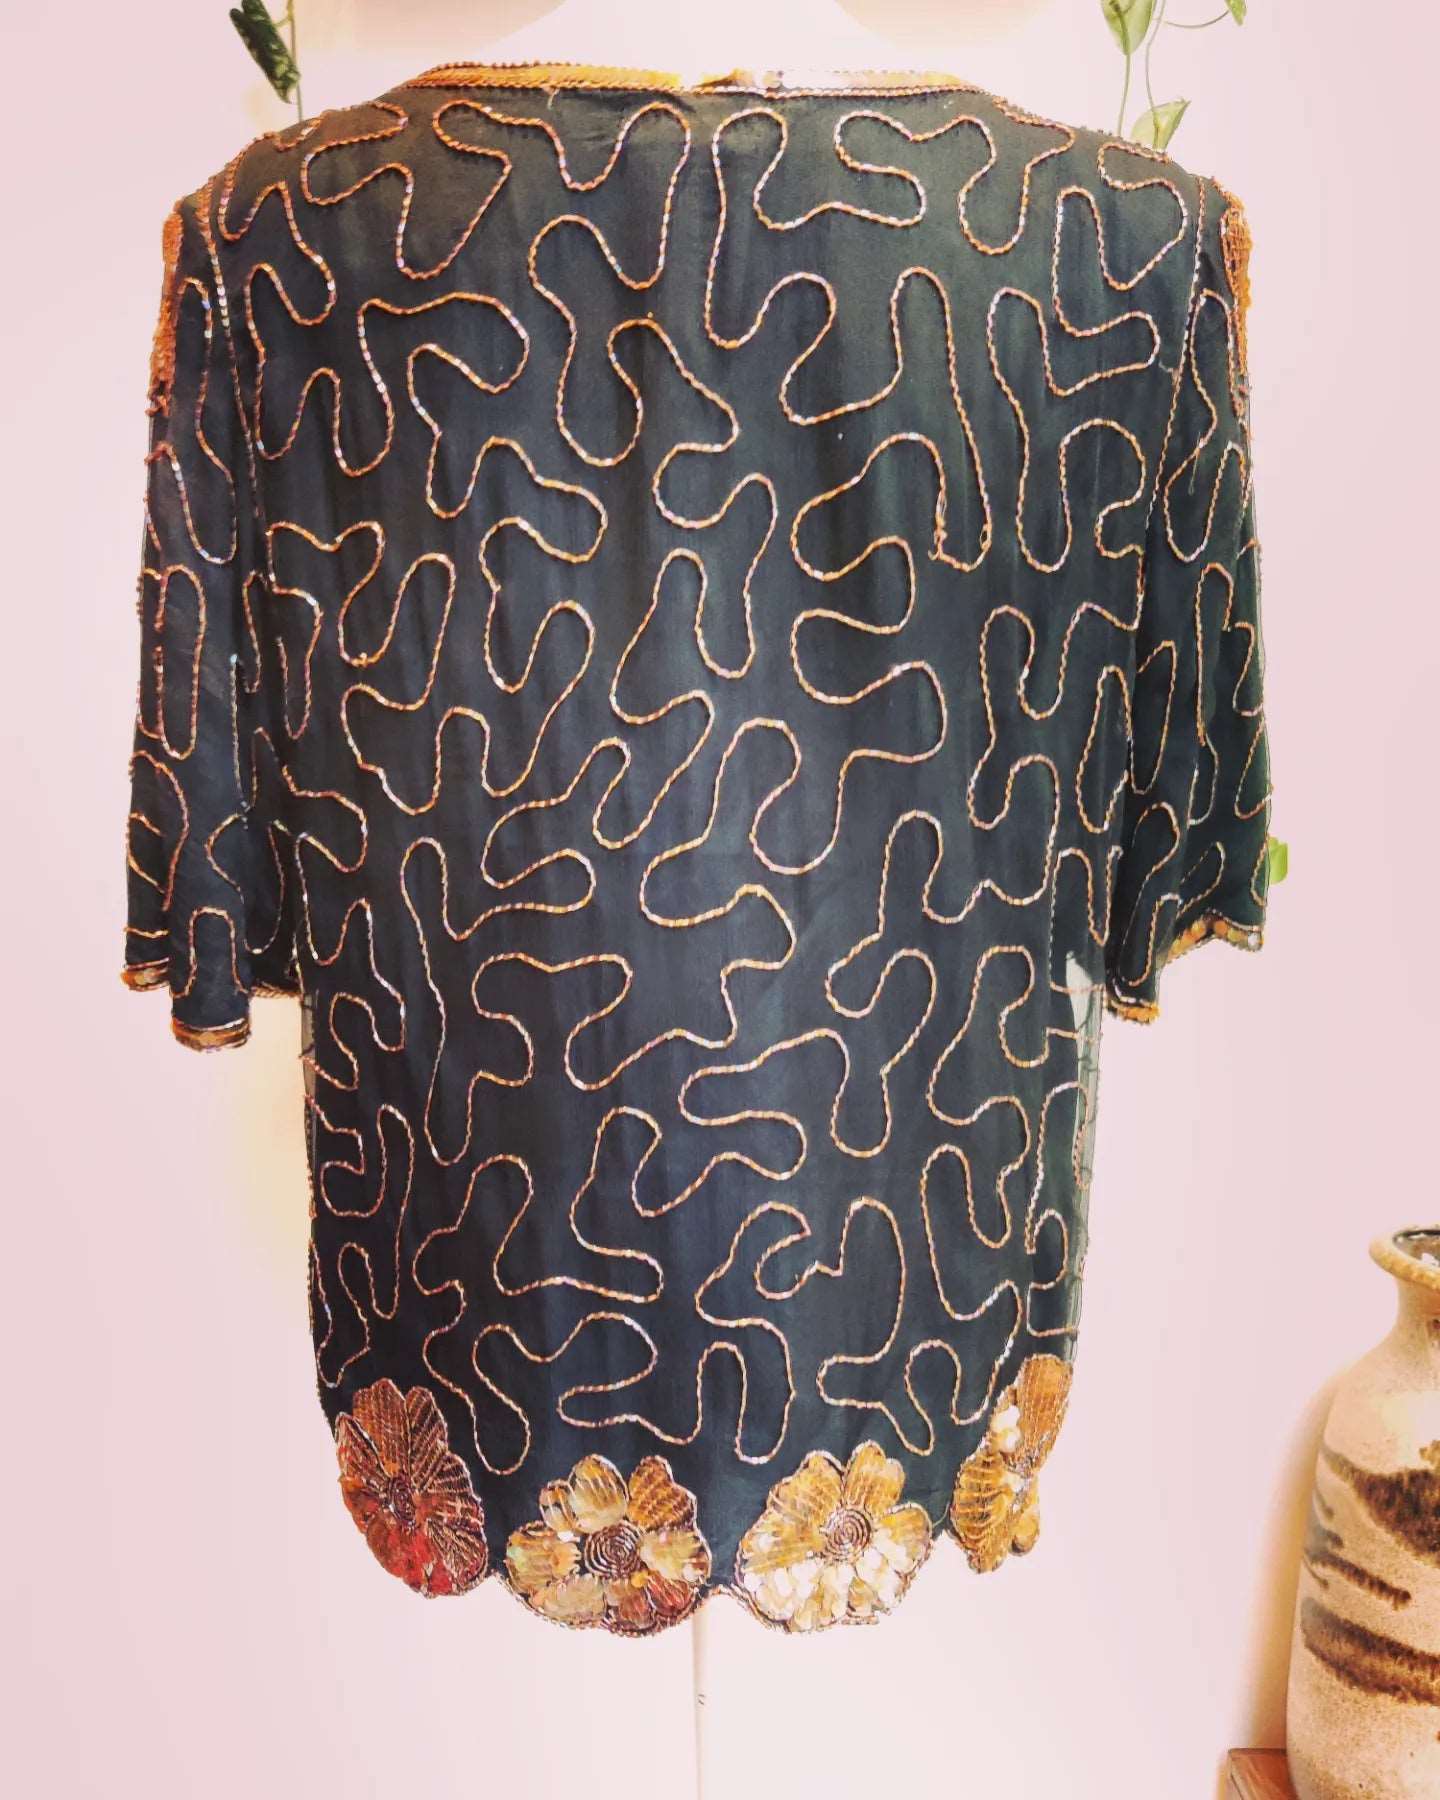 1980s Black and gold floral beaded top. Size 12-14.